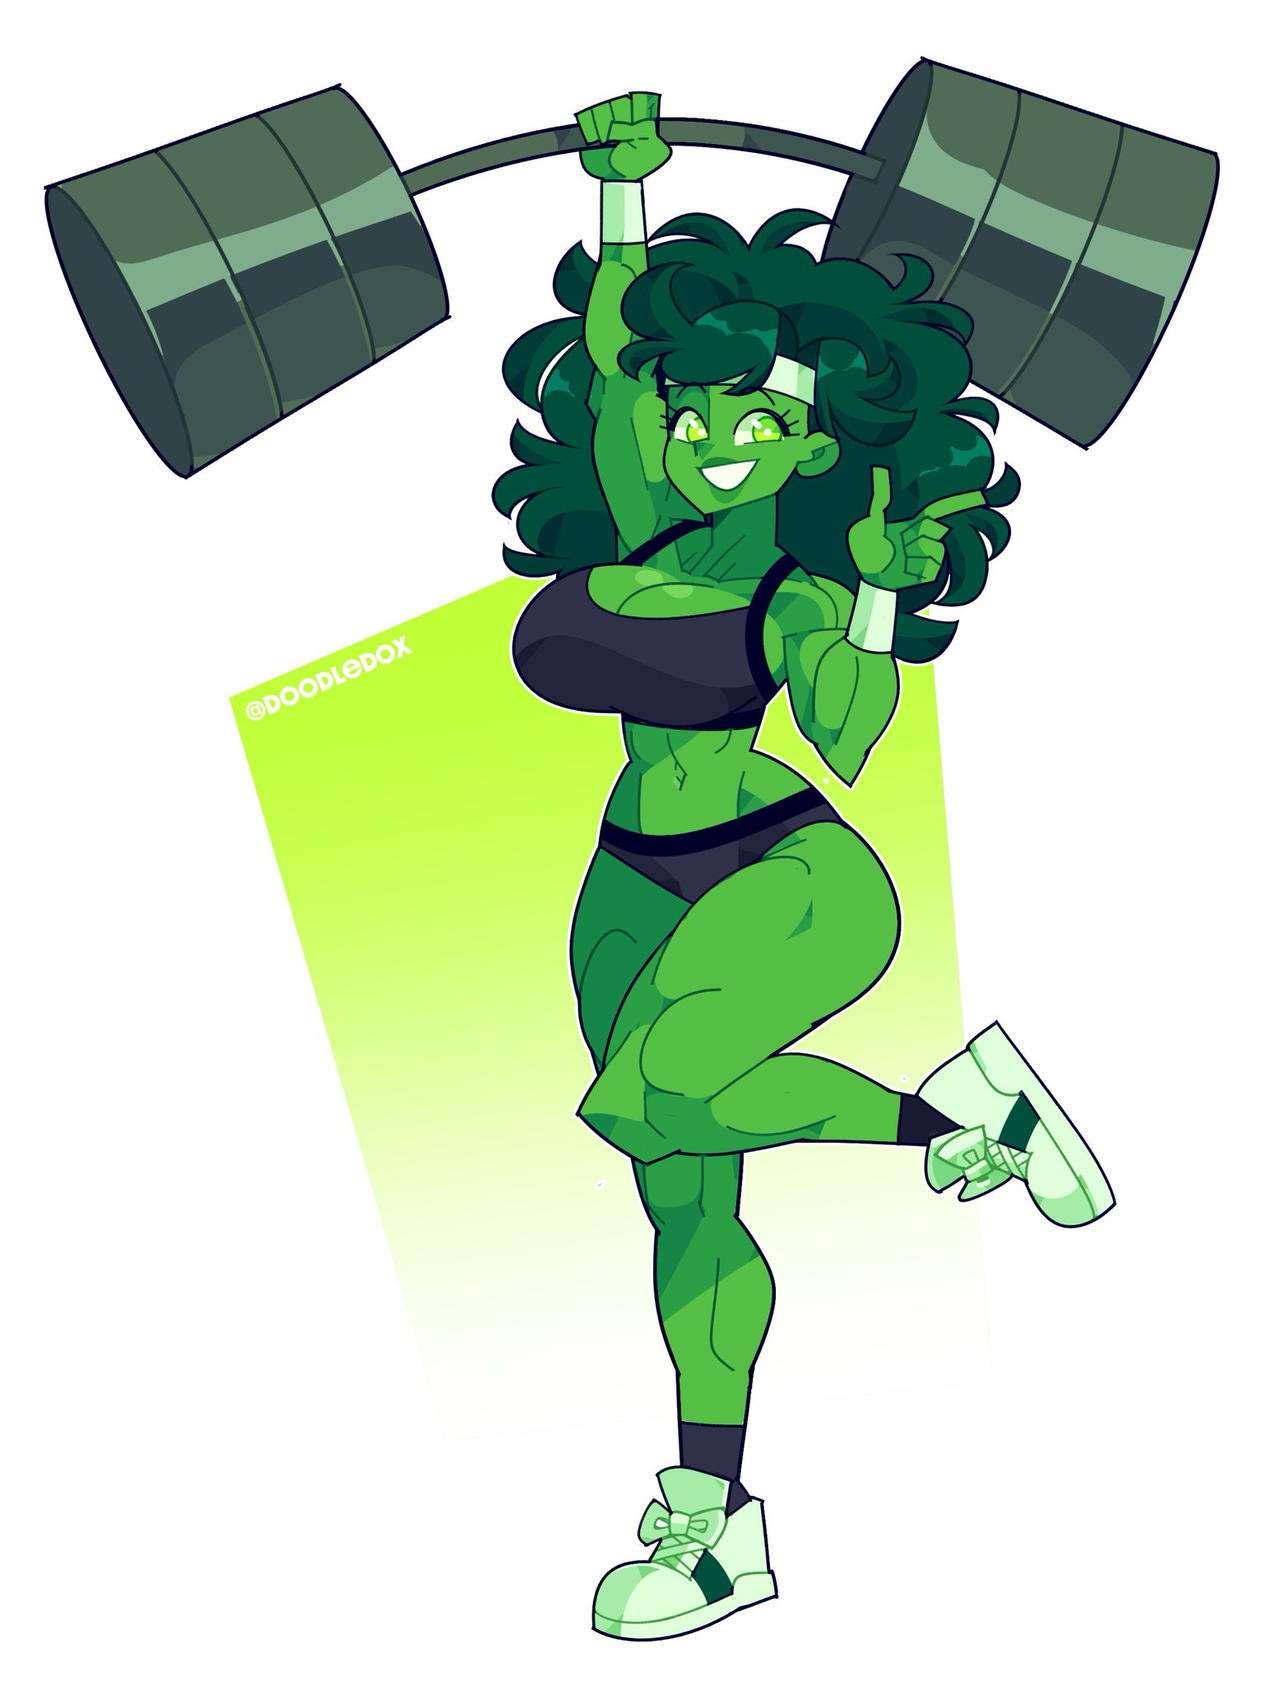 she_hulk_by_doodle_by_cerebus873_dfdruos-fullview.jpg